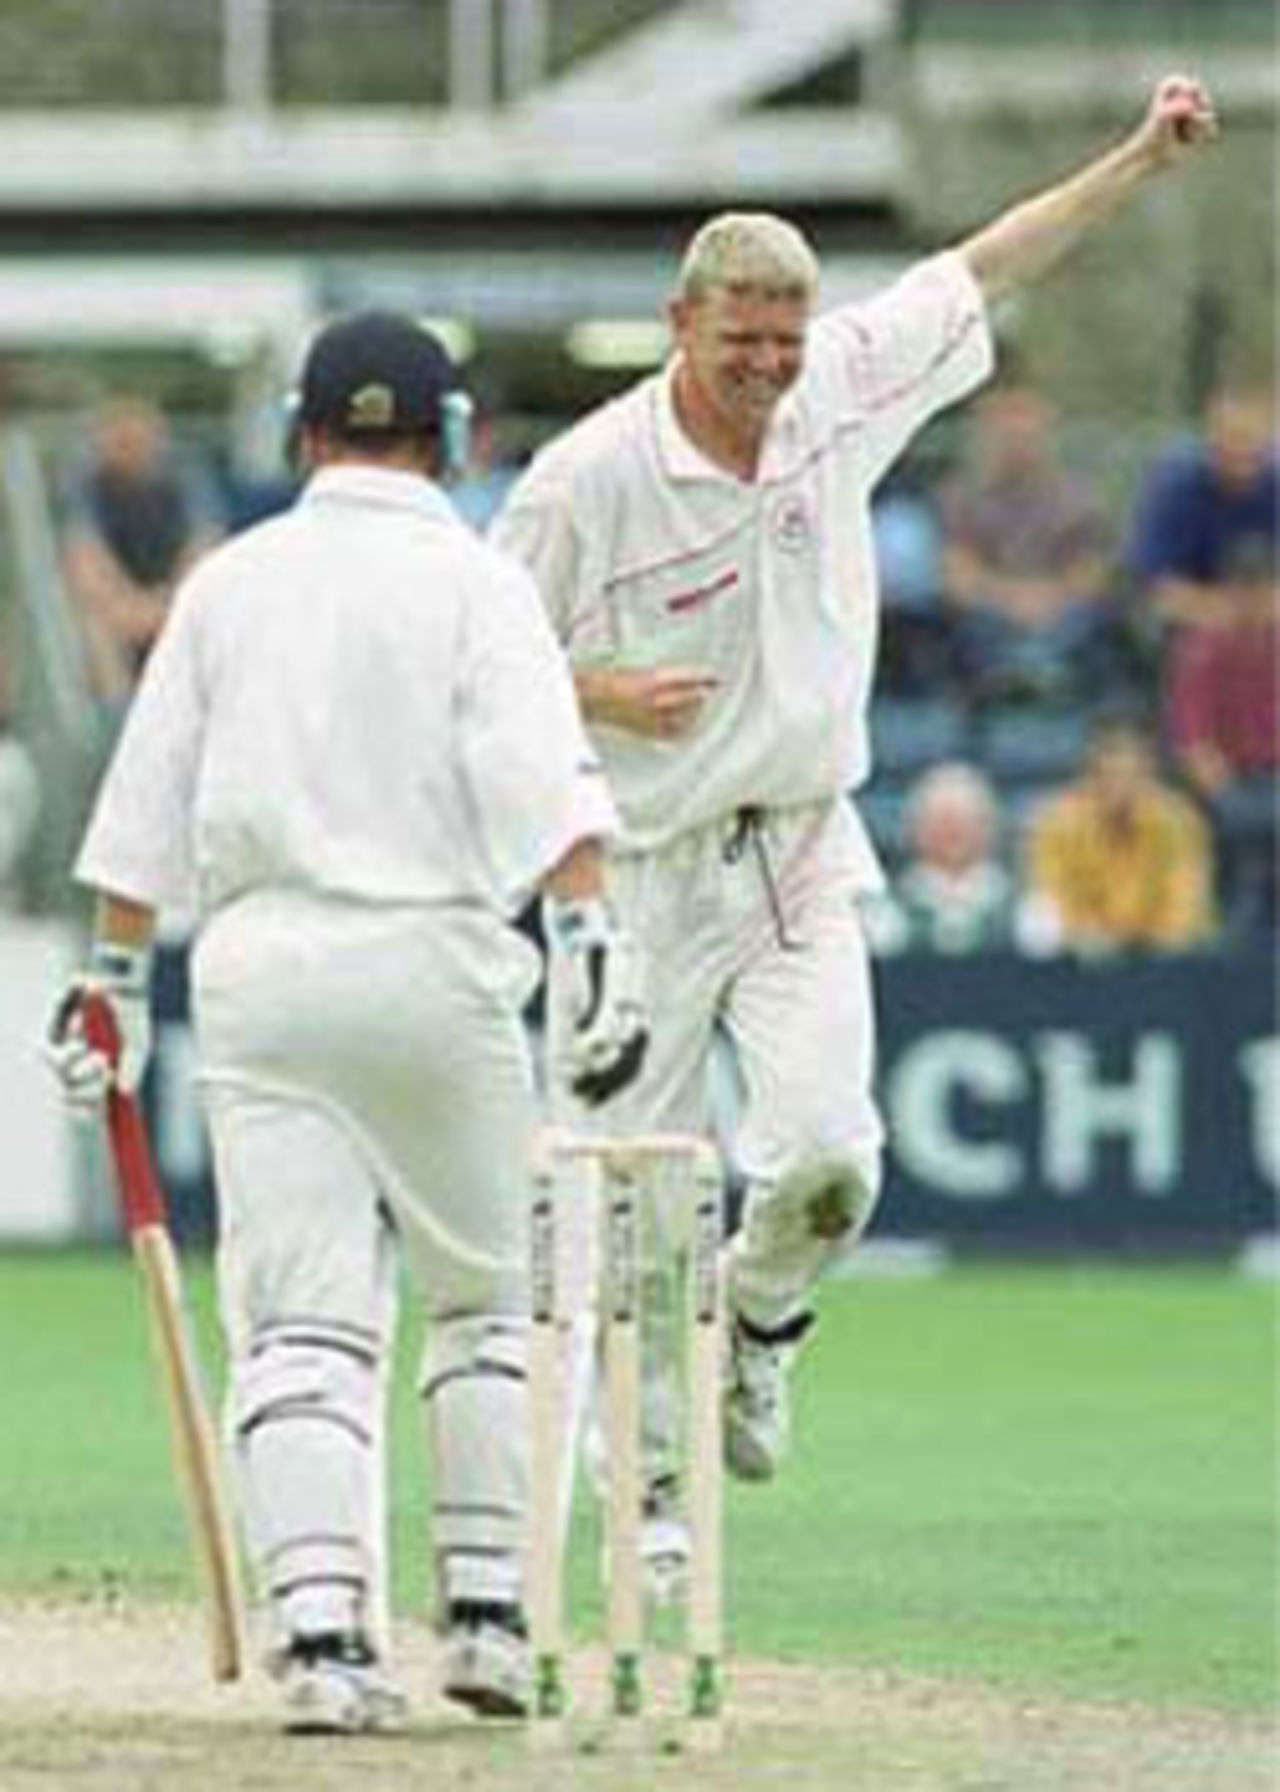 Martin pumps his fist after picking up the wicket of Snape, NatWest Trophy, 2000, 2nd Semi Final, Gloucestershire v Lancashire, The Royal & Sun Alliance County Ground, Bristol, 13 August 2000.